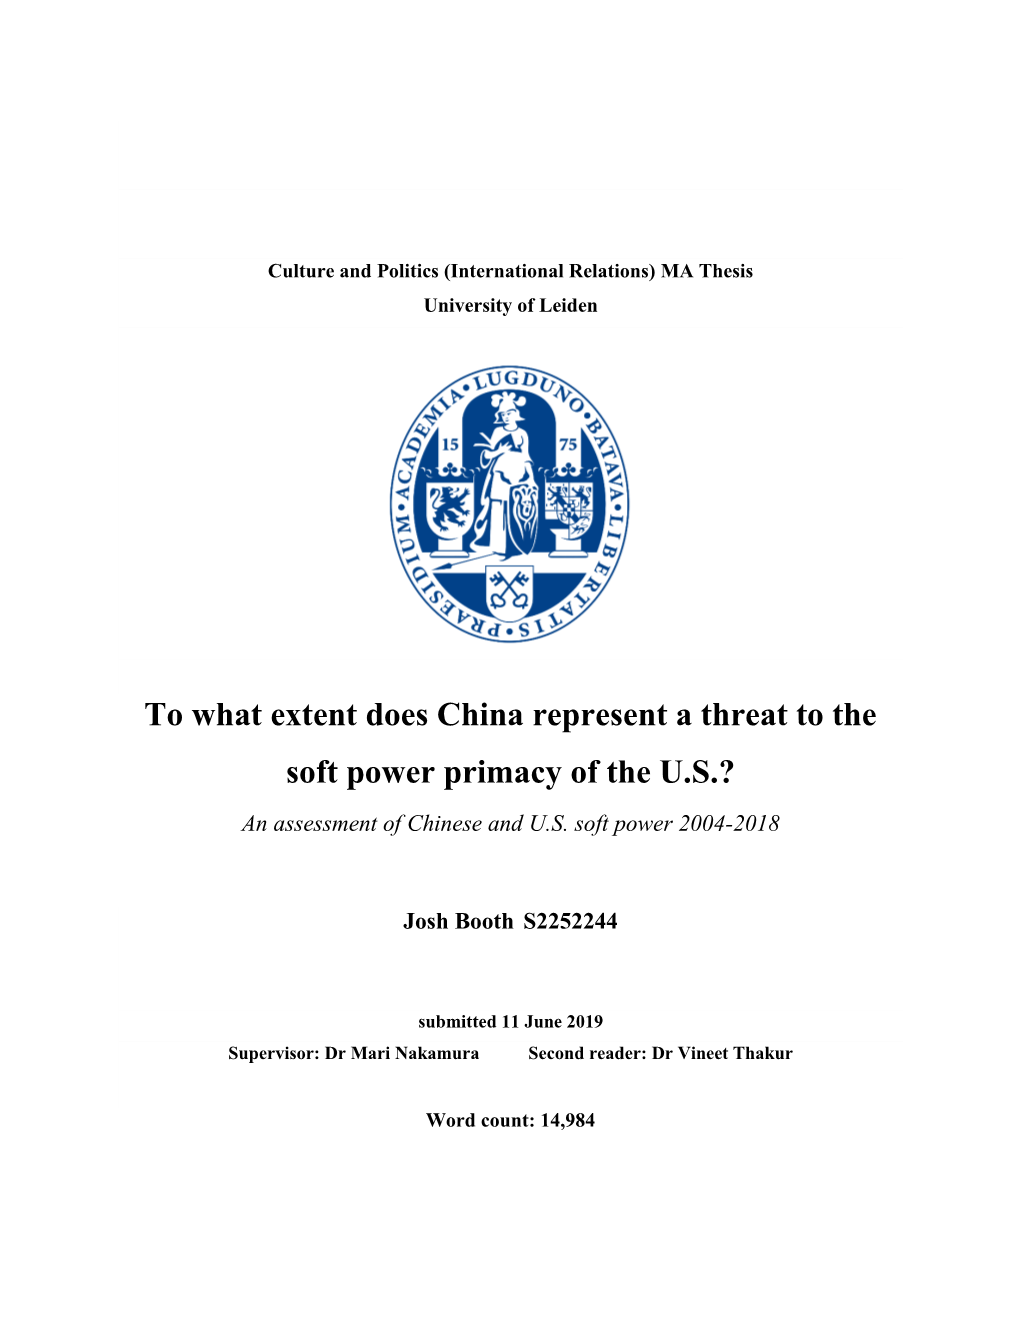 To What Extent Does China Represent a Threat to the Soft Power Primacy of the U.S.? an Assessment of Chinese and U.S